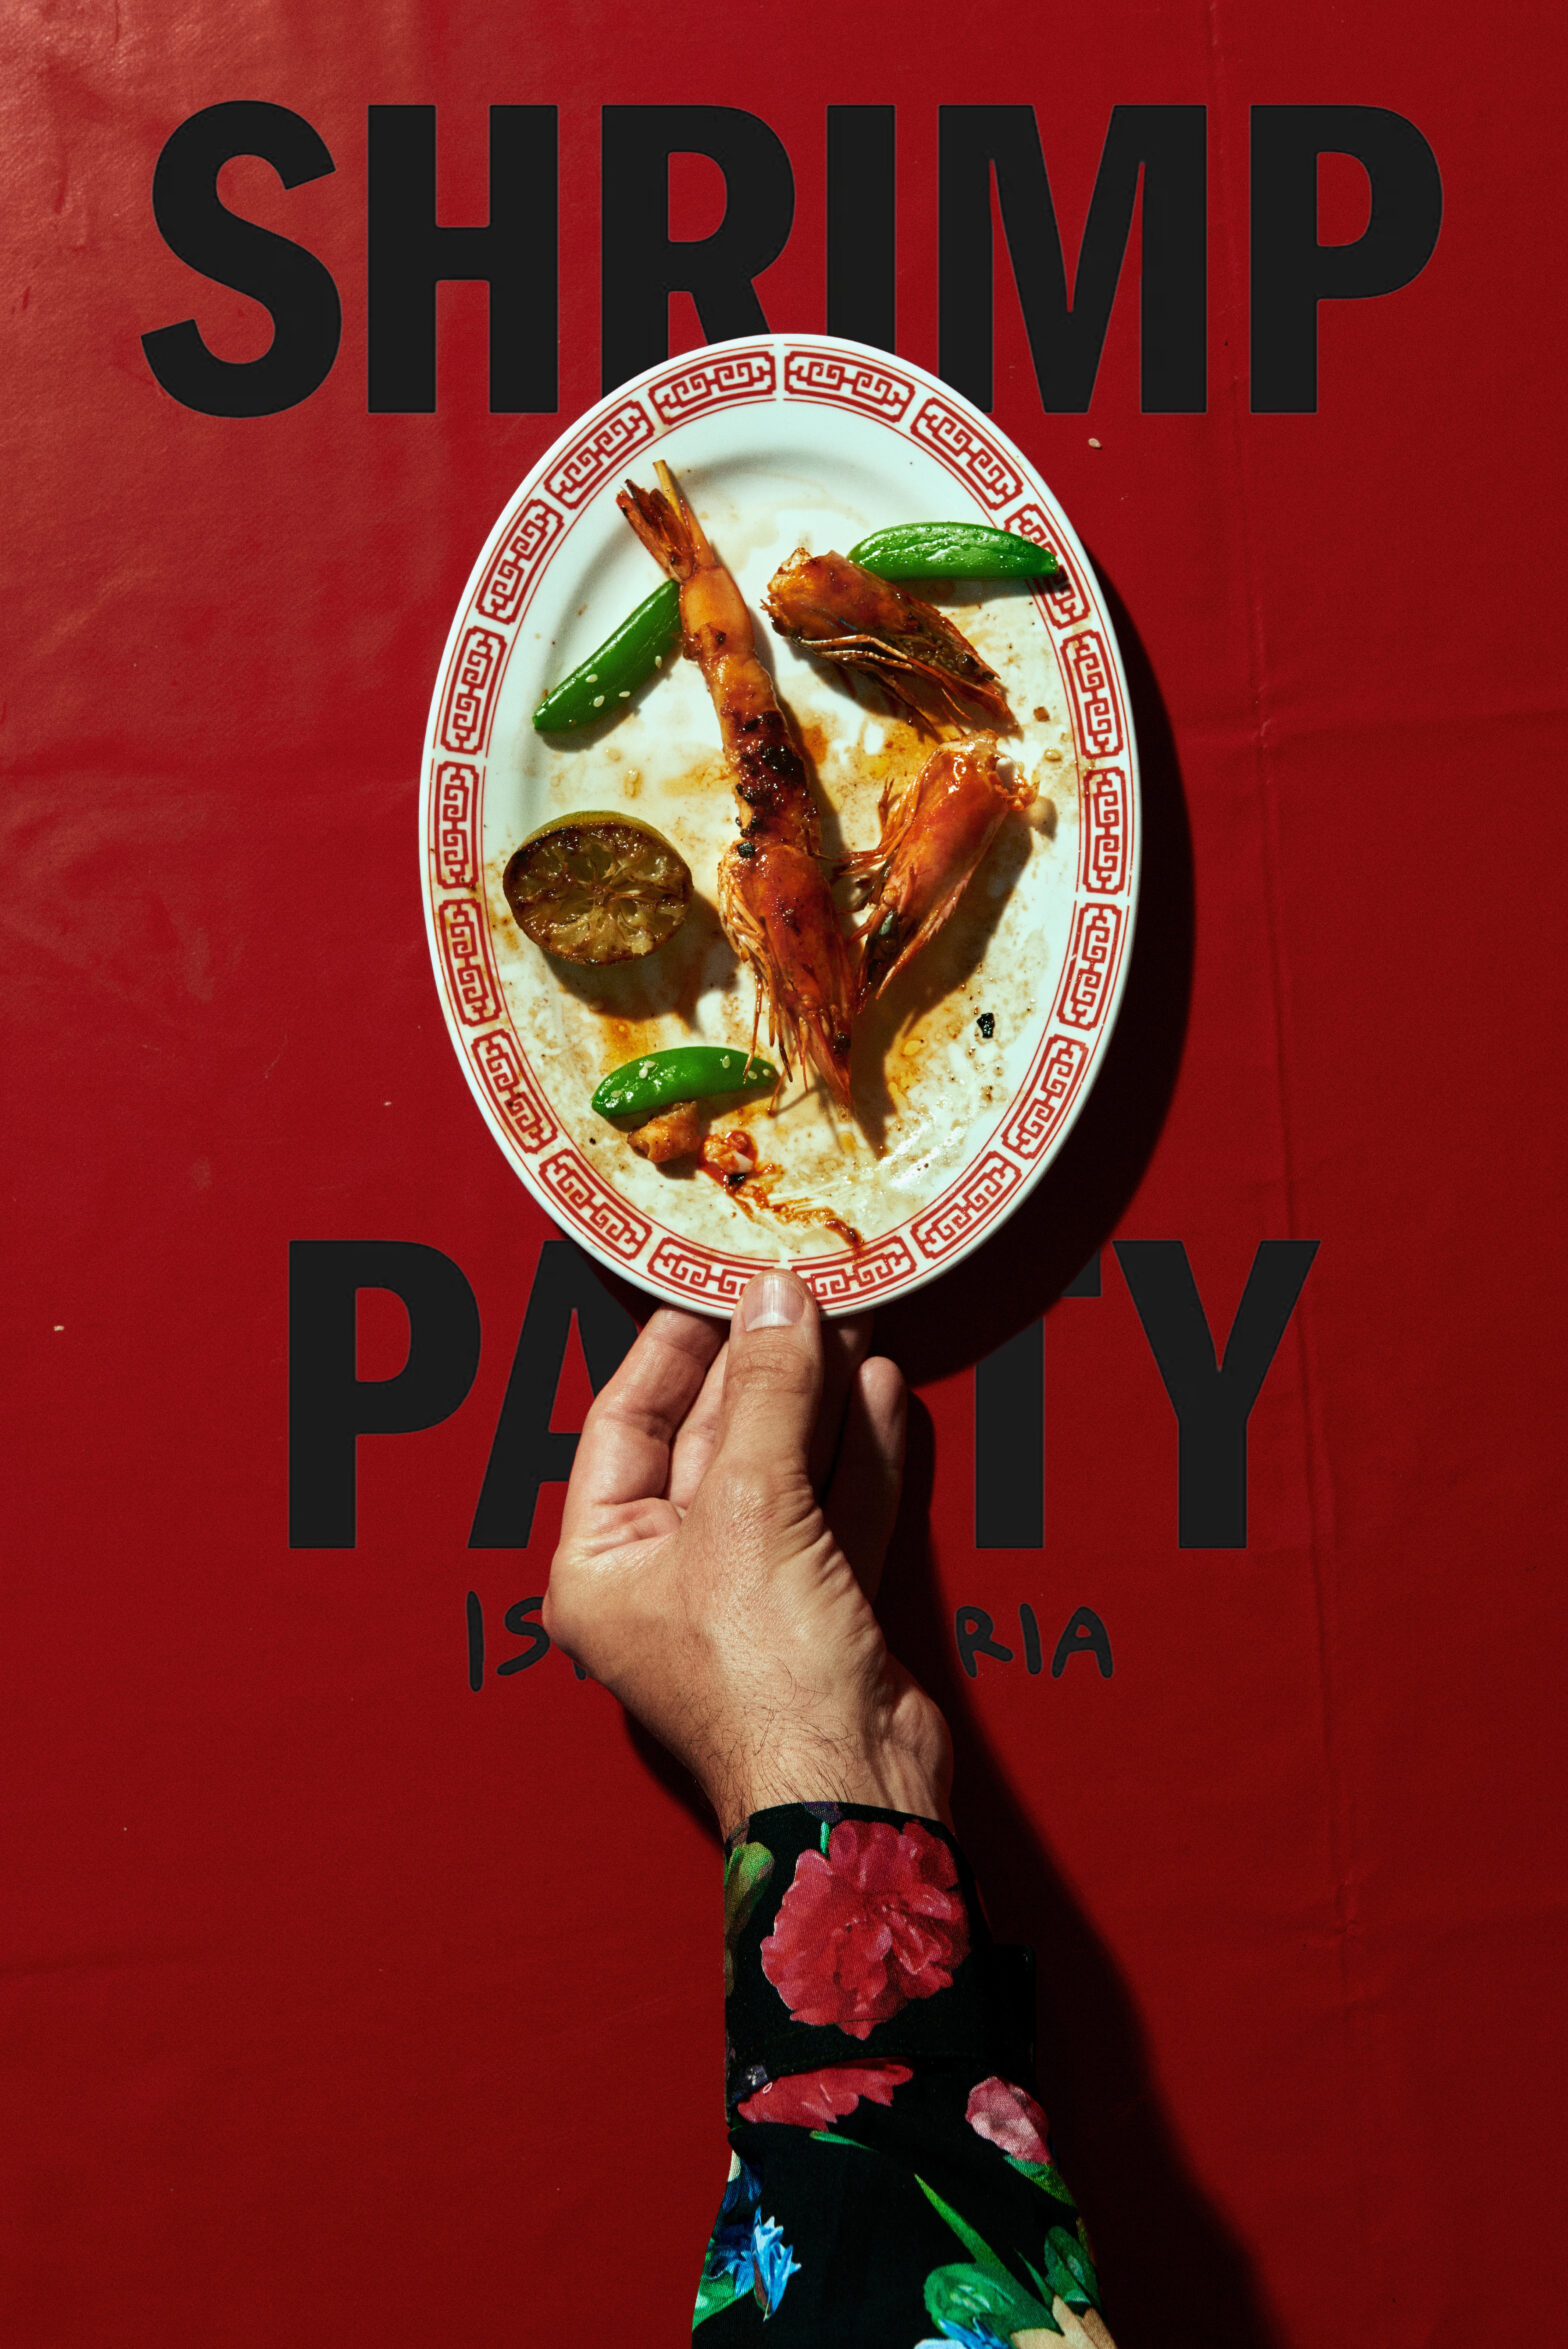 Graphic work of a male hand pushes an almost finished plate of shrimps over red tablecloth.